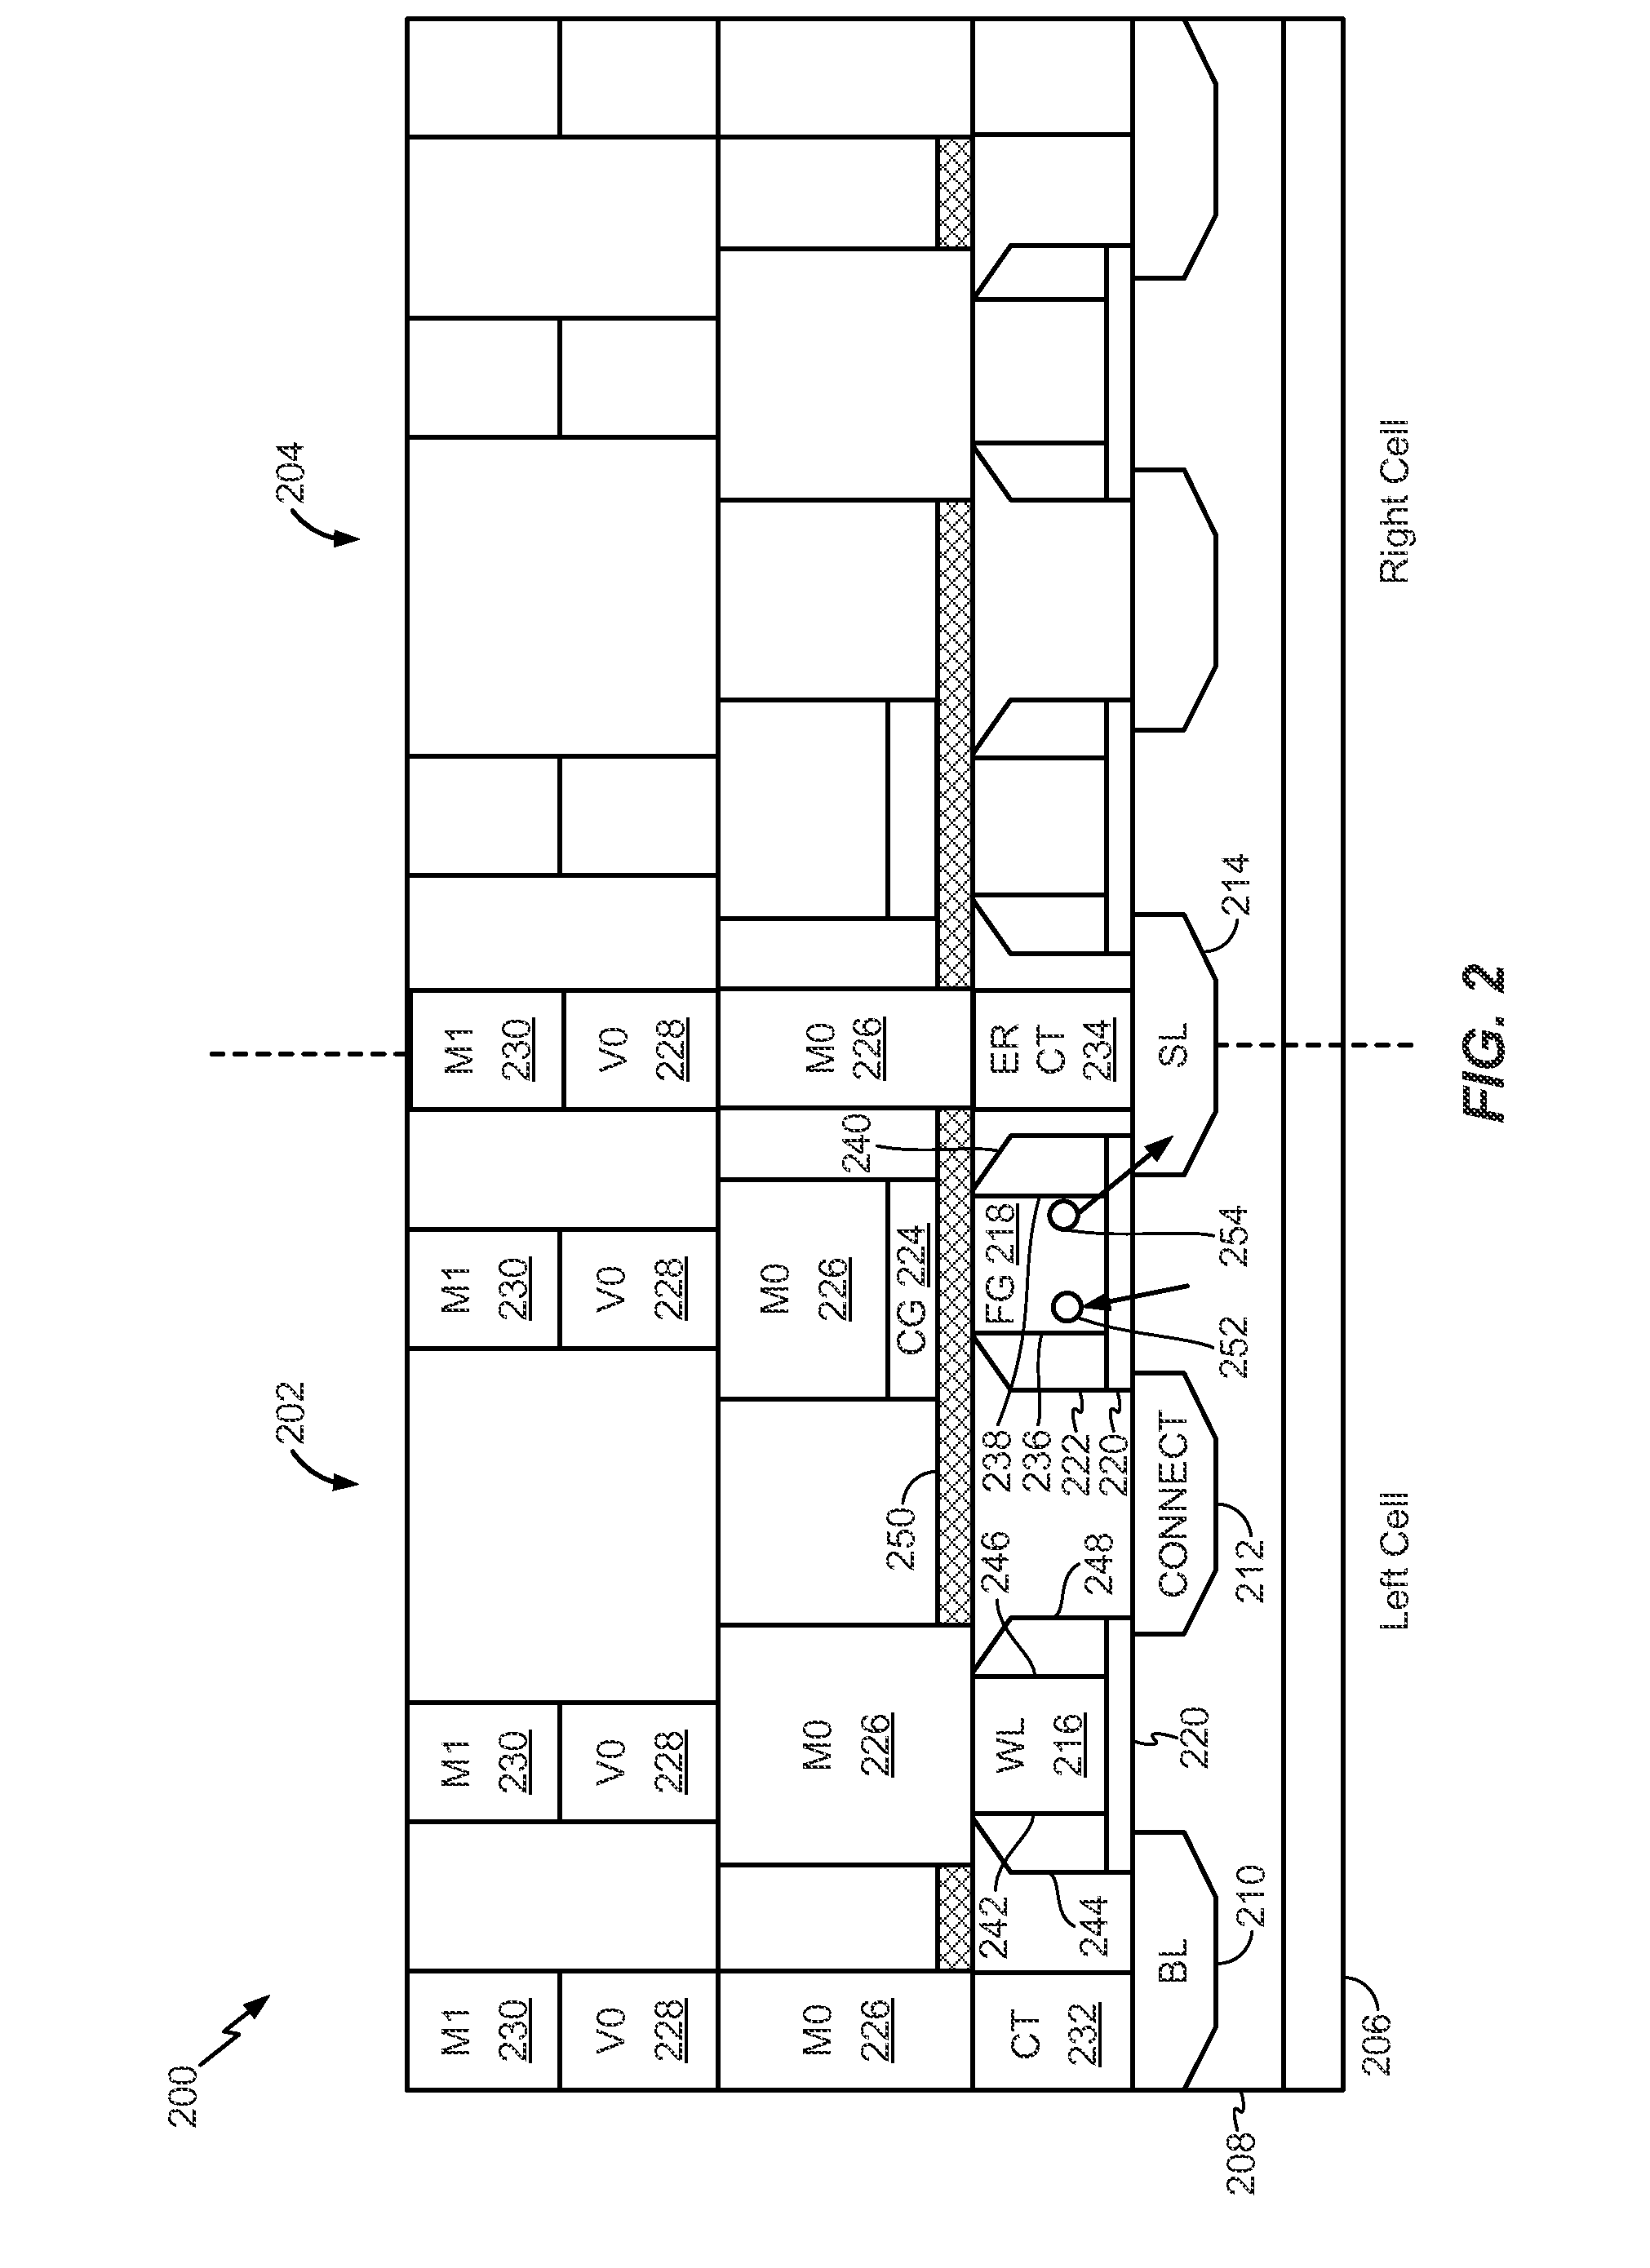 Flash memory cell with capacitive coupling between a metal floating gate and a metal control gate